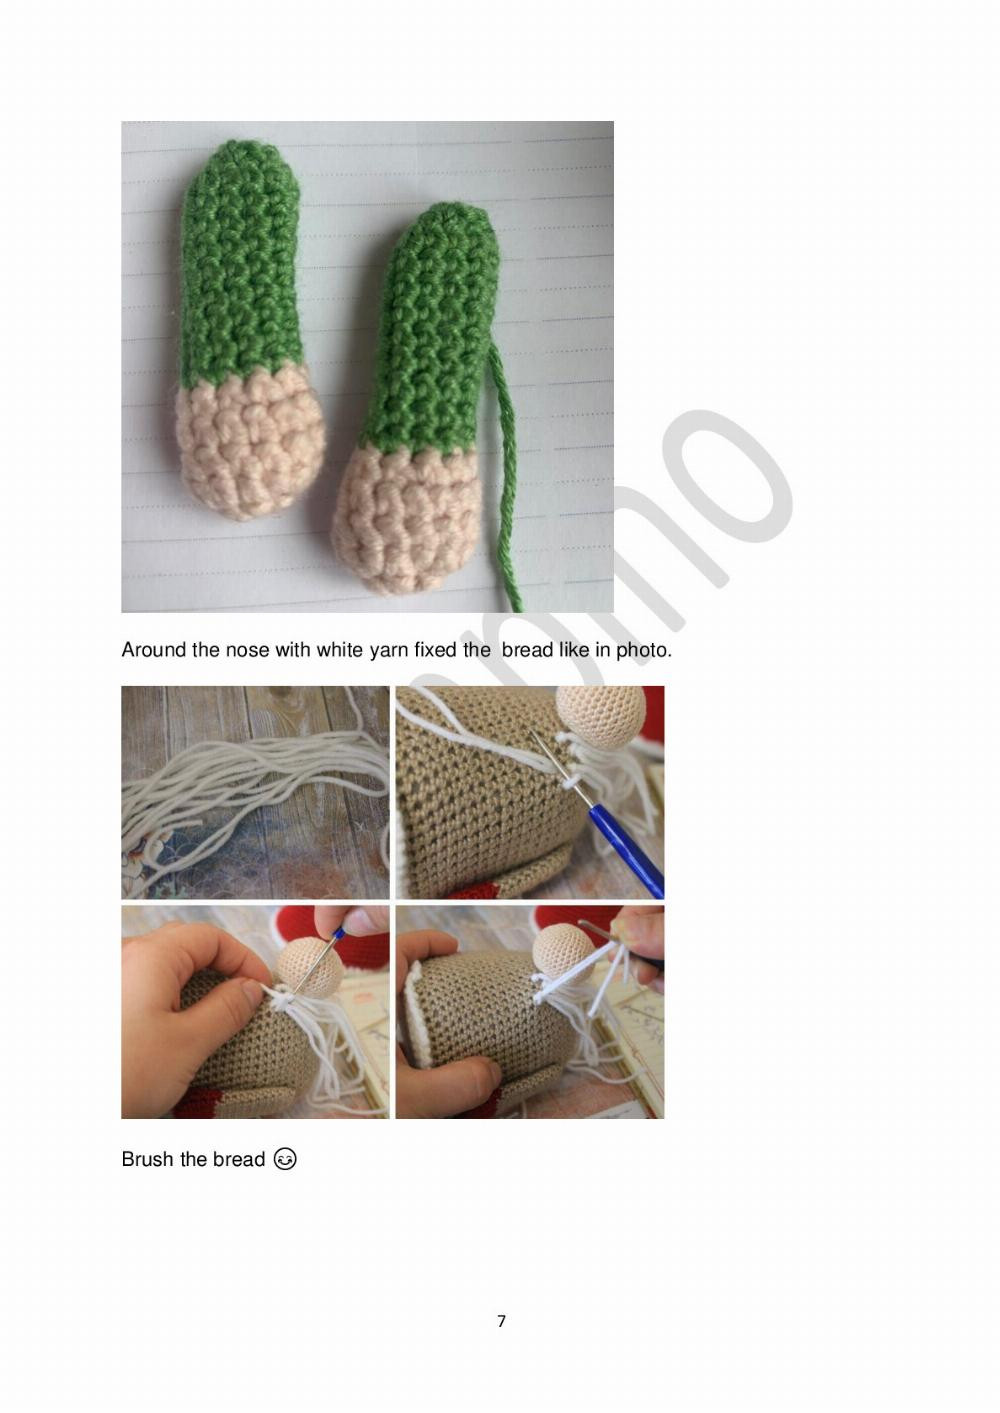 Frog gnome and frog toy pattern